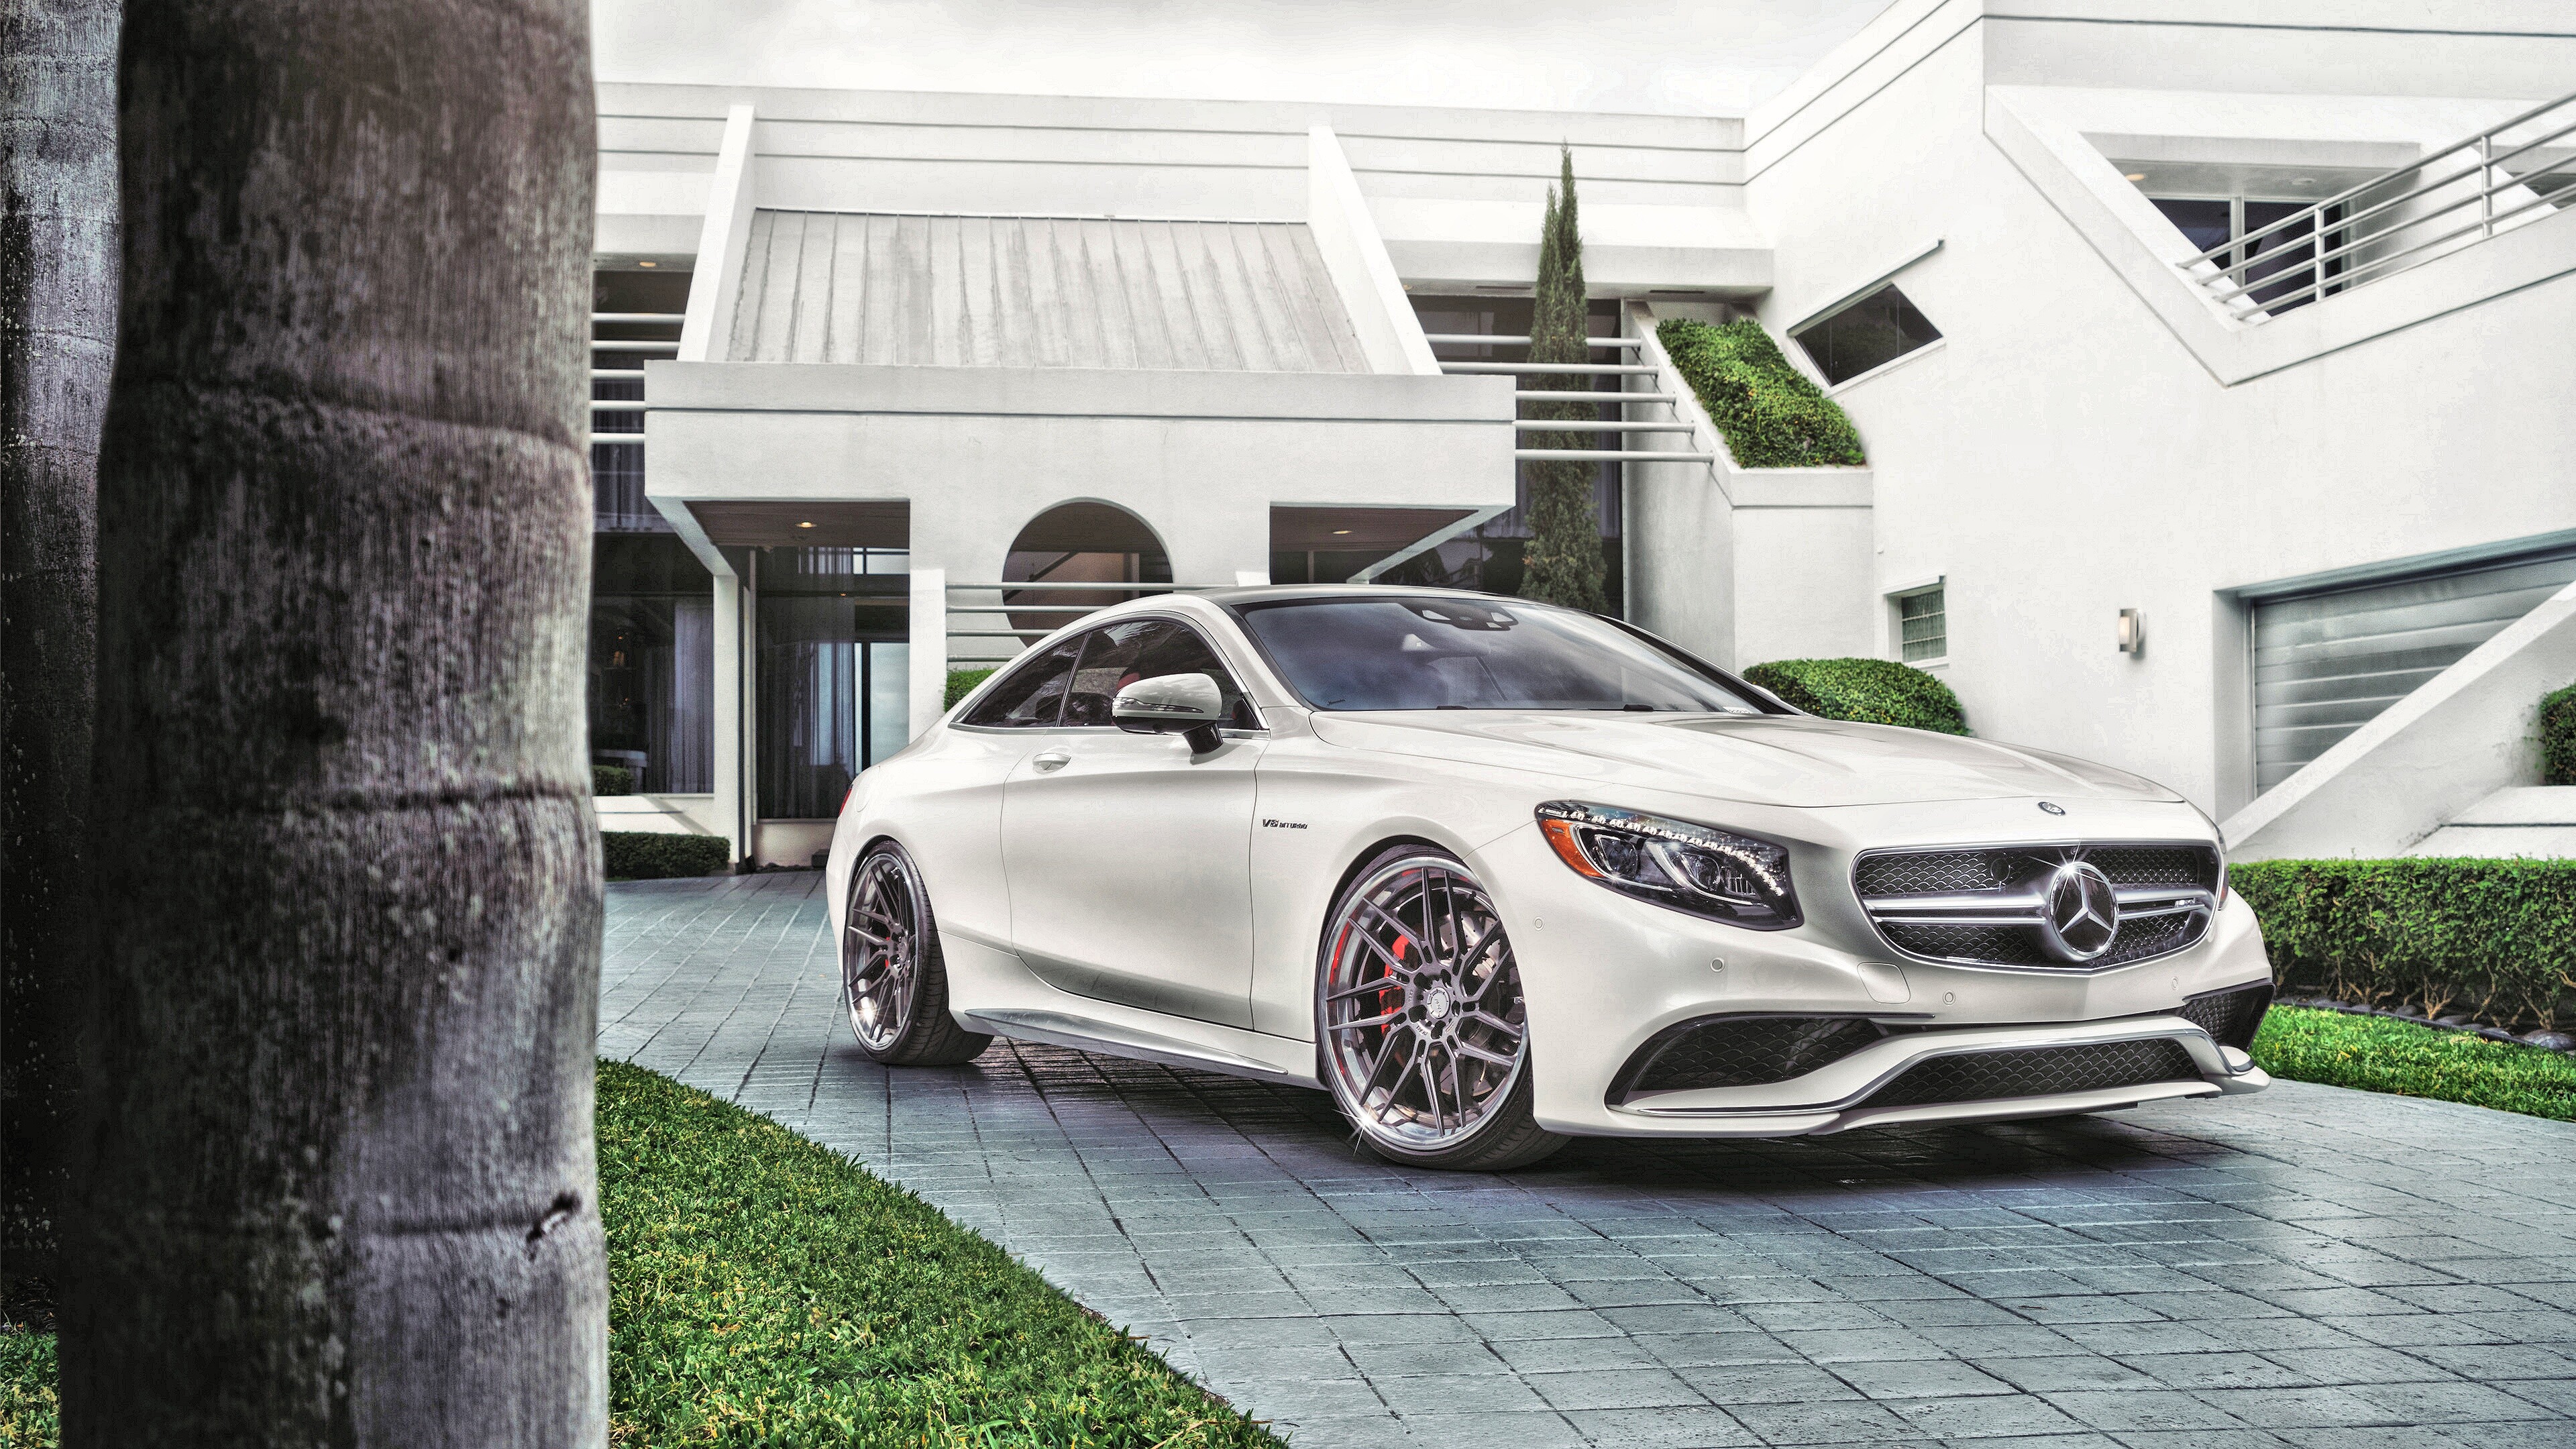 Mercedes-Benz: S63 AMG, Manufacturing plant in Kecskemet, Hungary, making B-Class and CLA. 3840x2160 4K Wallpaper.